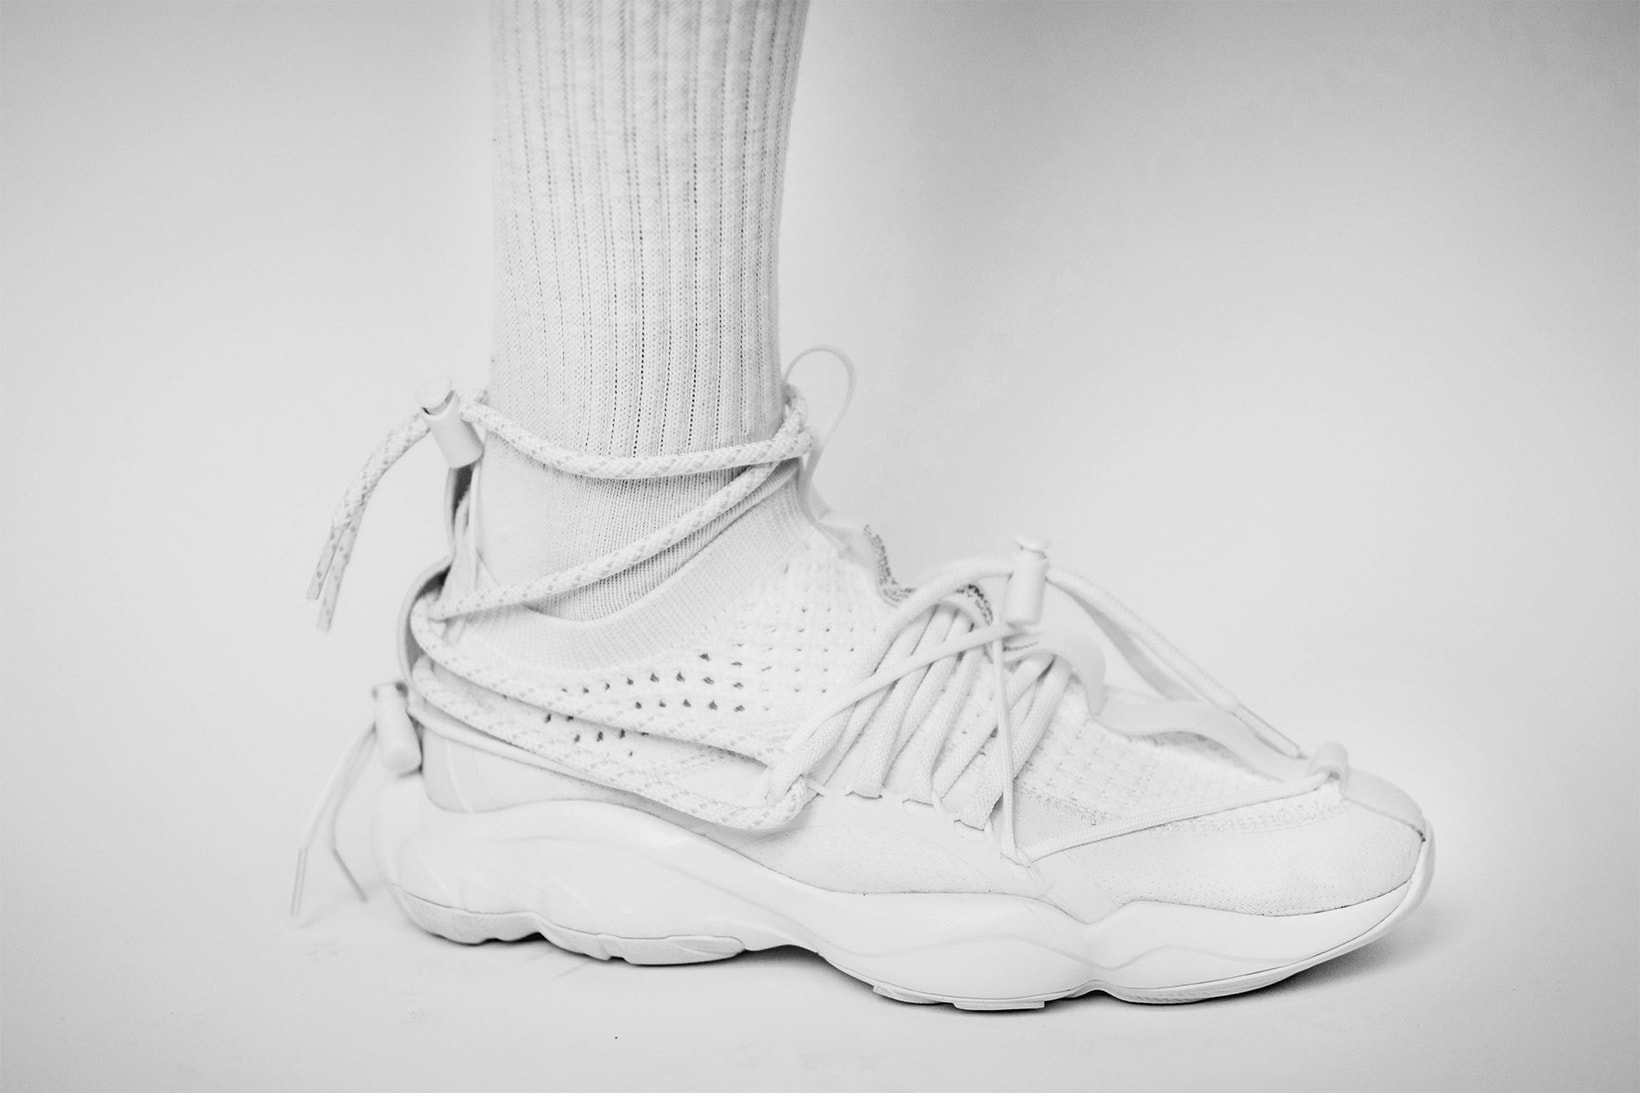 Pyer Moss Reebok DMX Fusion 1 Experiment collaboration first look white sneakers shoes chunky runner runway 2018 Fall winter collection footwear